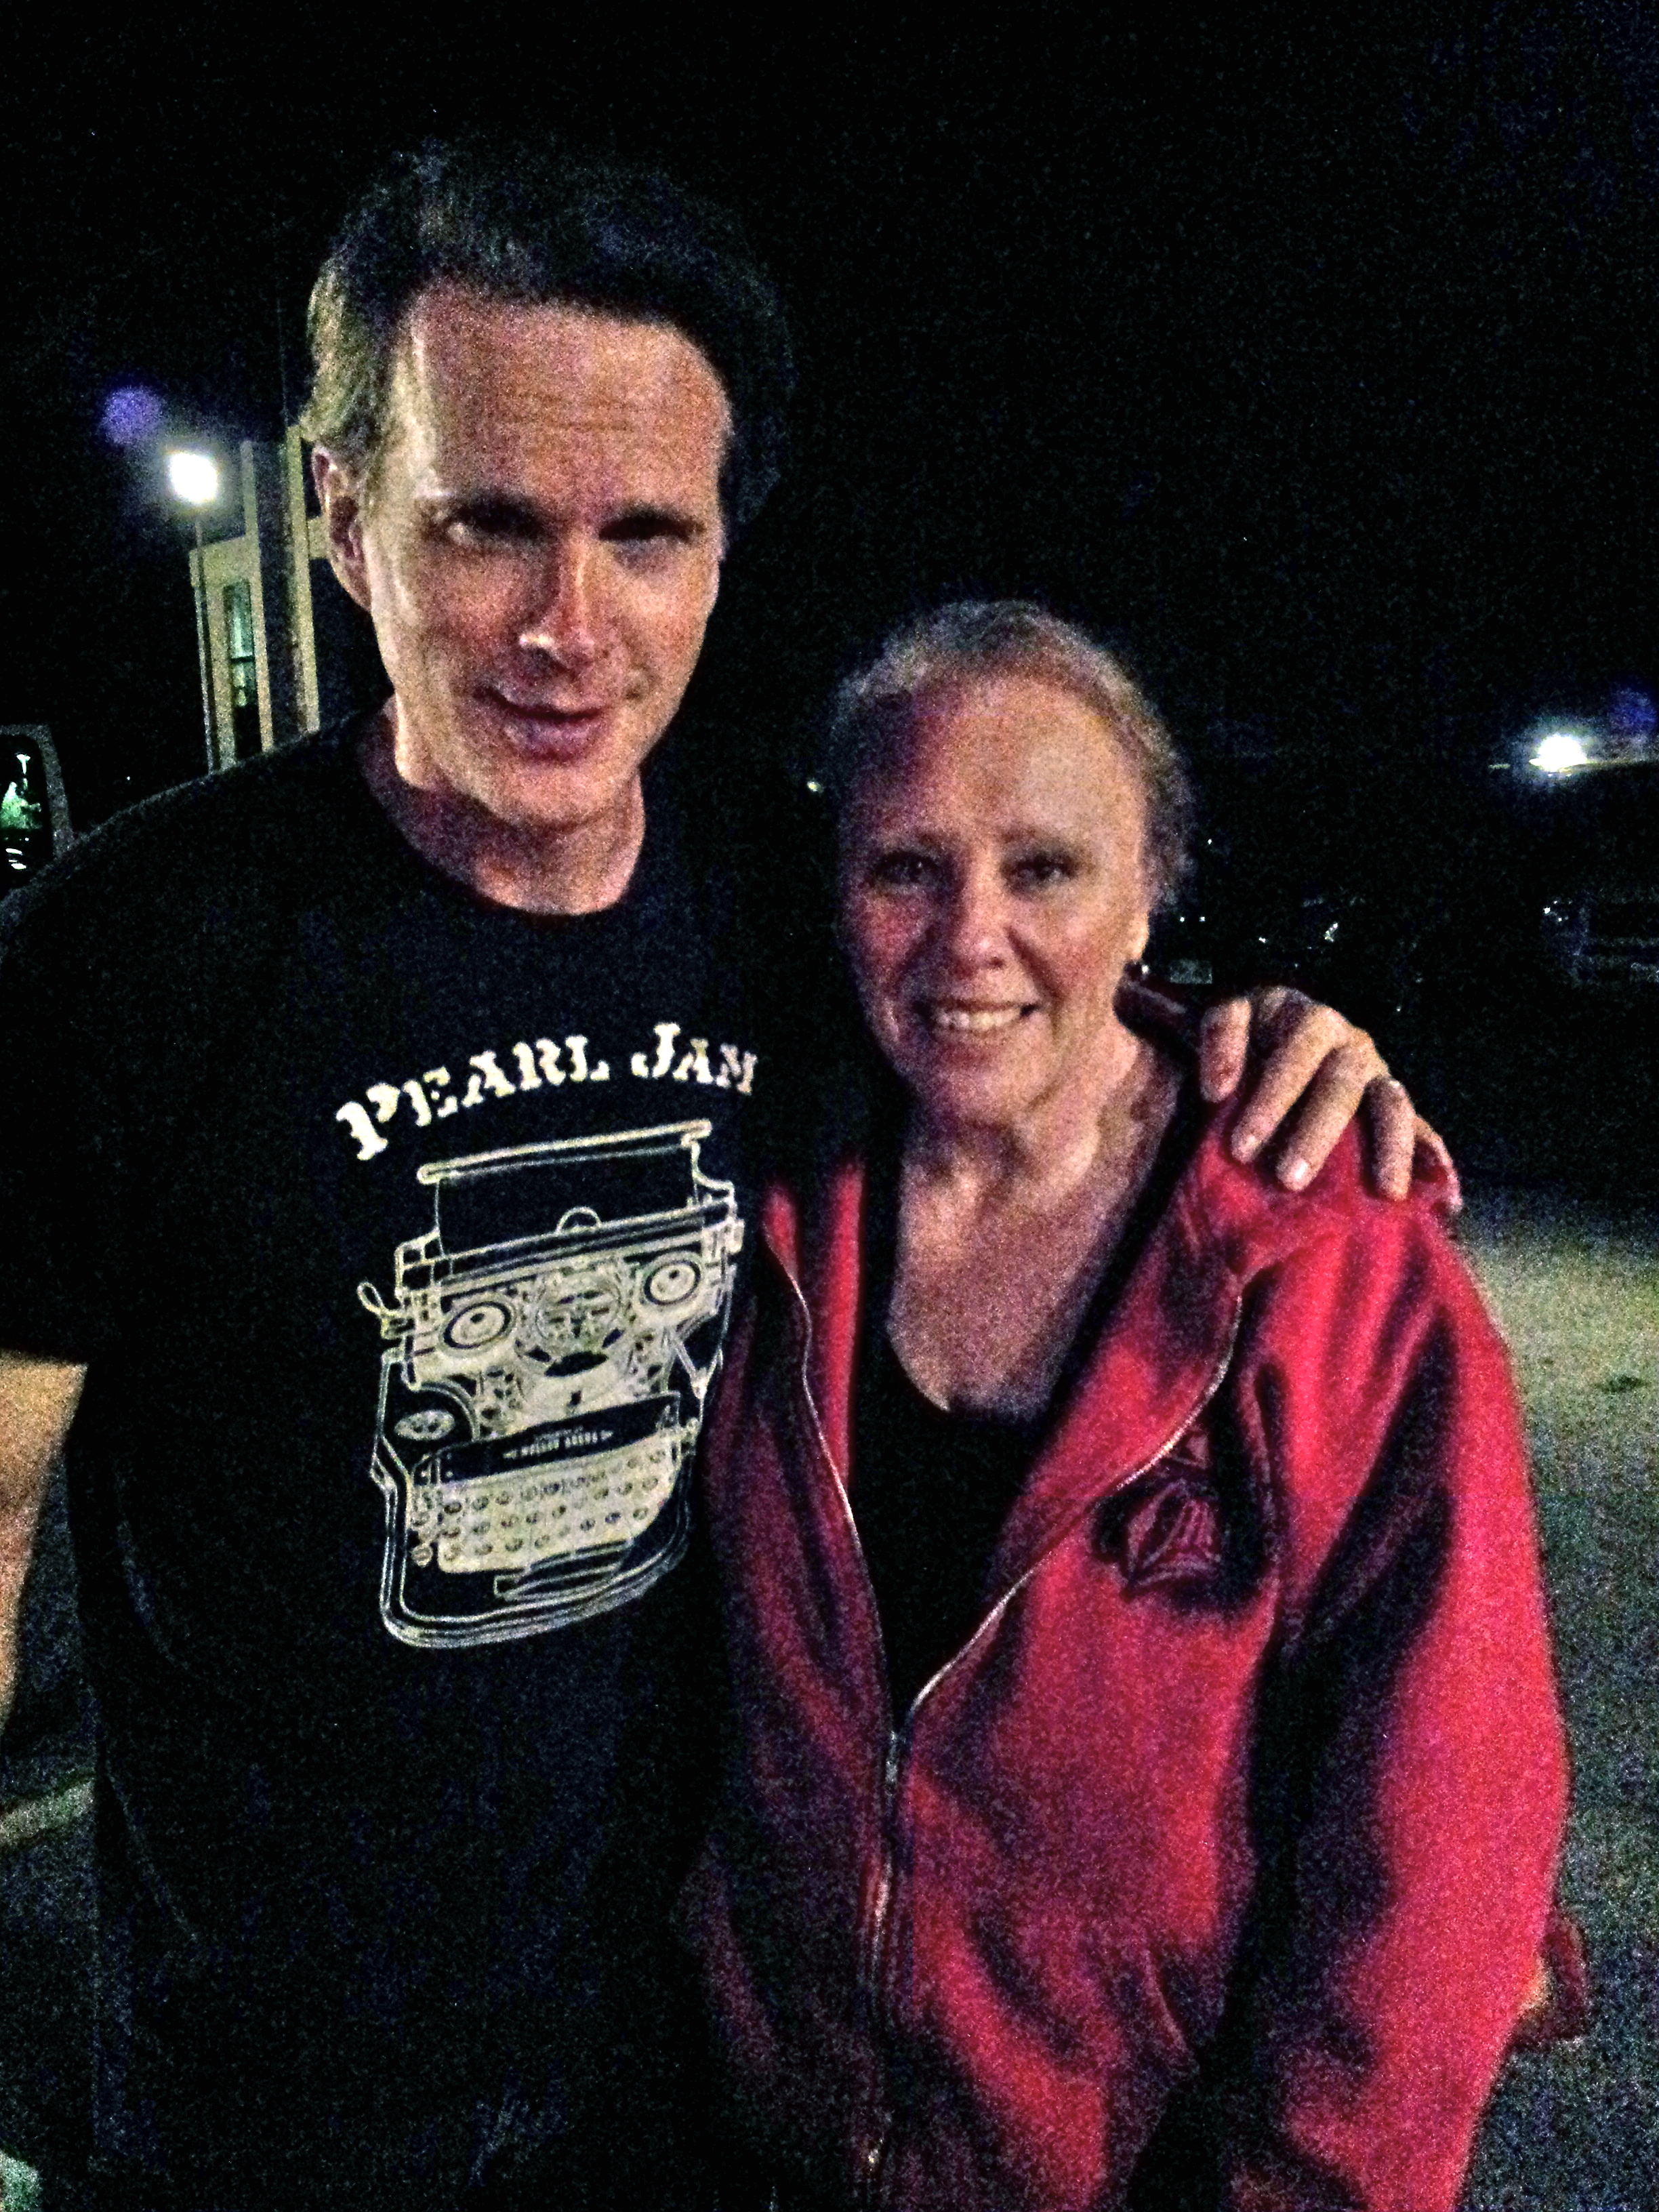 ON SET: 'Being Charlie' Deborah Lee Douglas with 'As You Wish' Author CARY ELWES ... We have also worked together on GRANITE FLATS ... Nicest Guy! 4.28.15 UT.